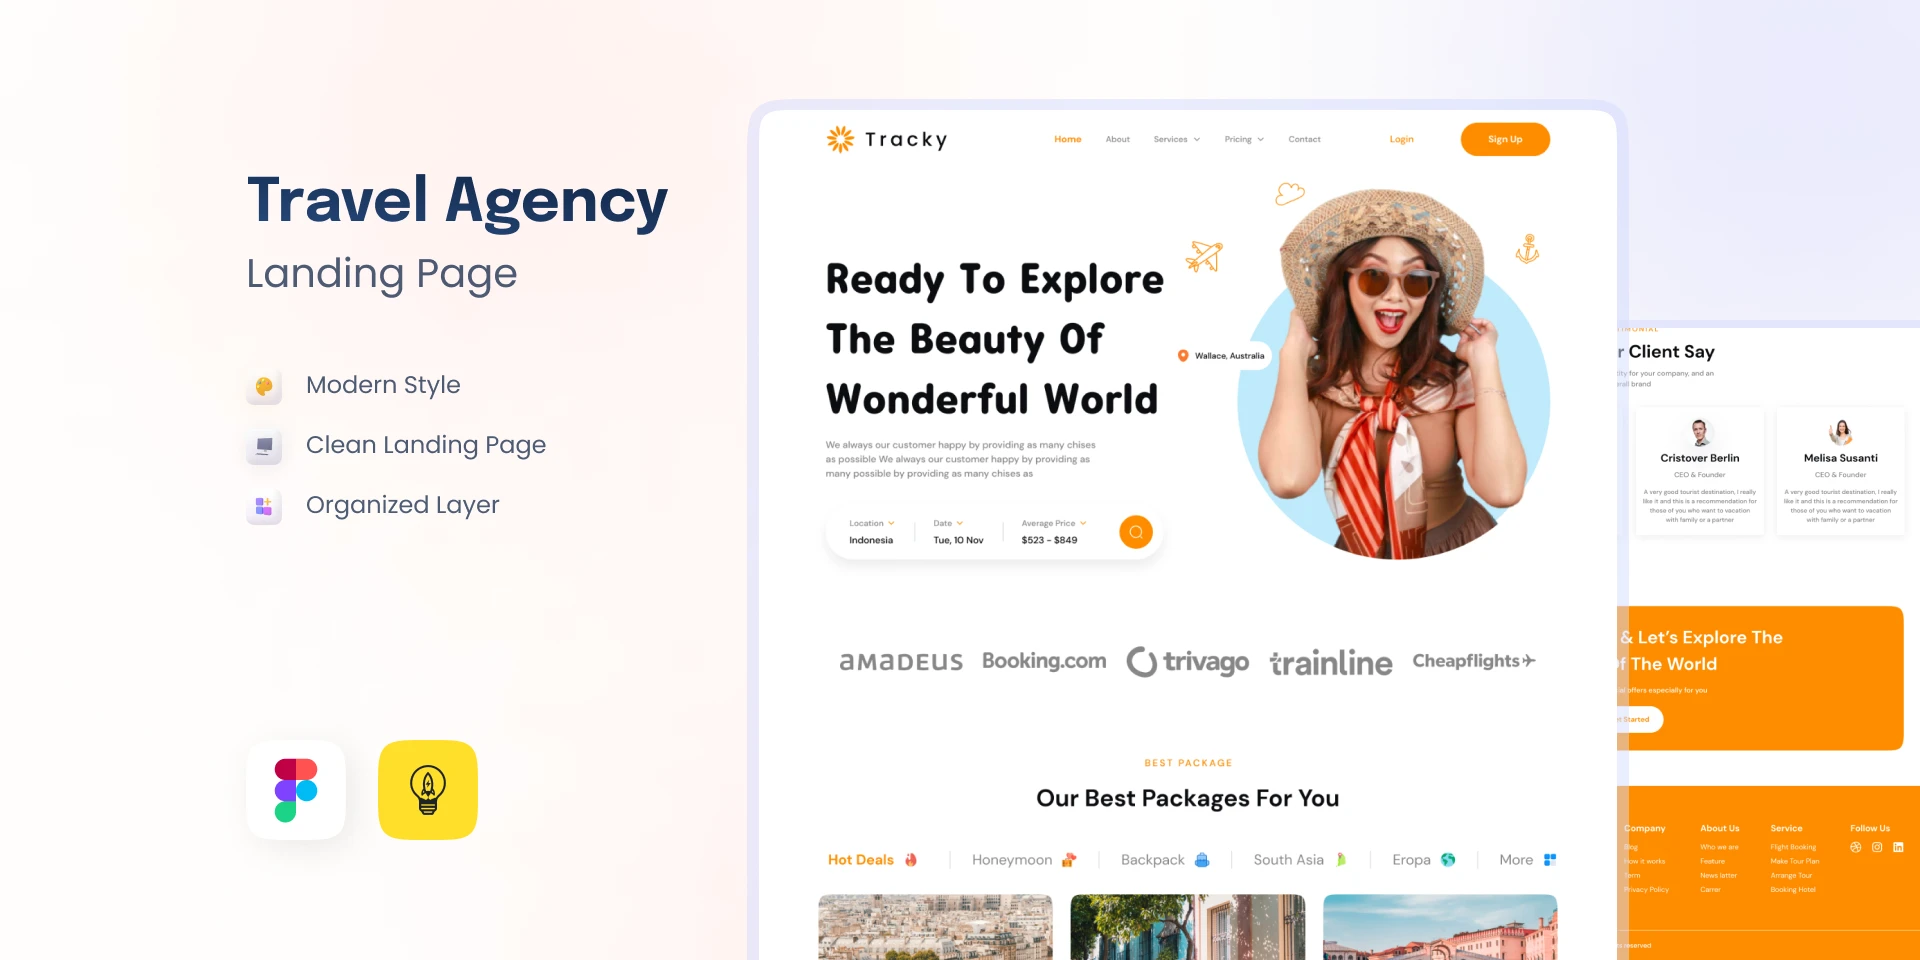 Tracky - Travel Agency Landing Page - Only $5 for Figma and Adobe XD